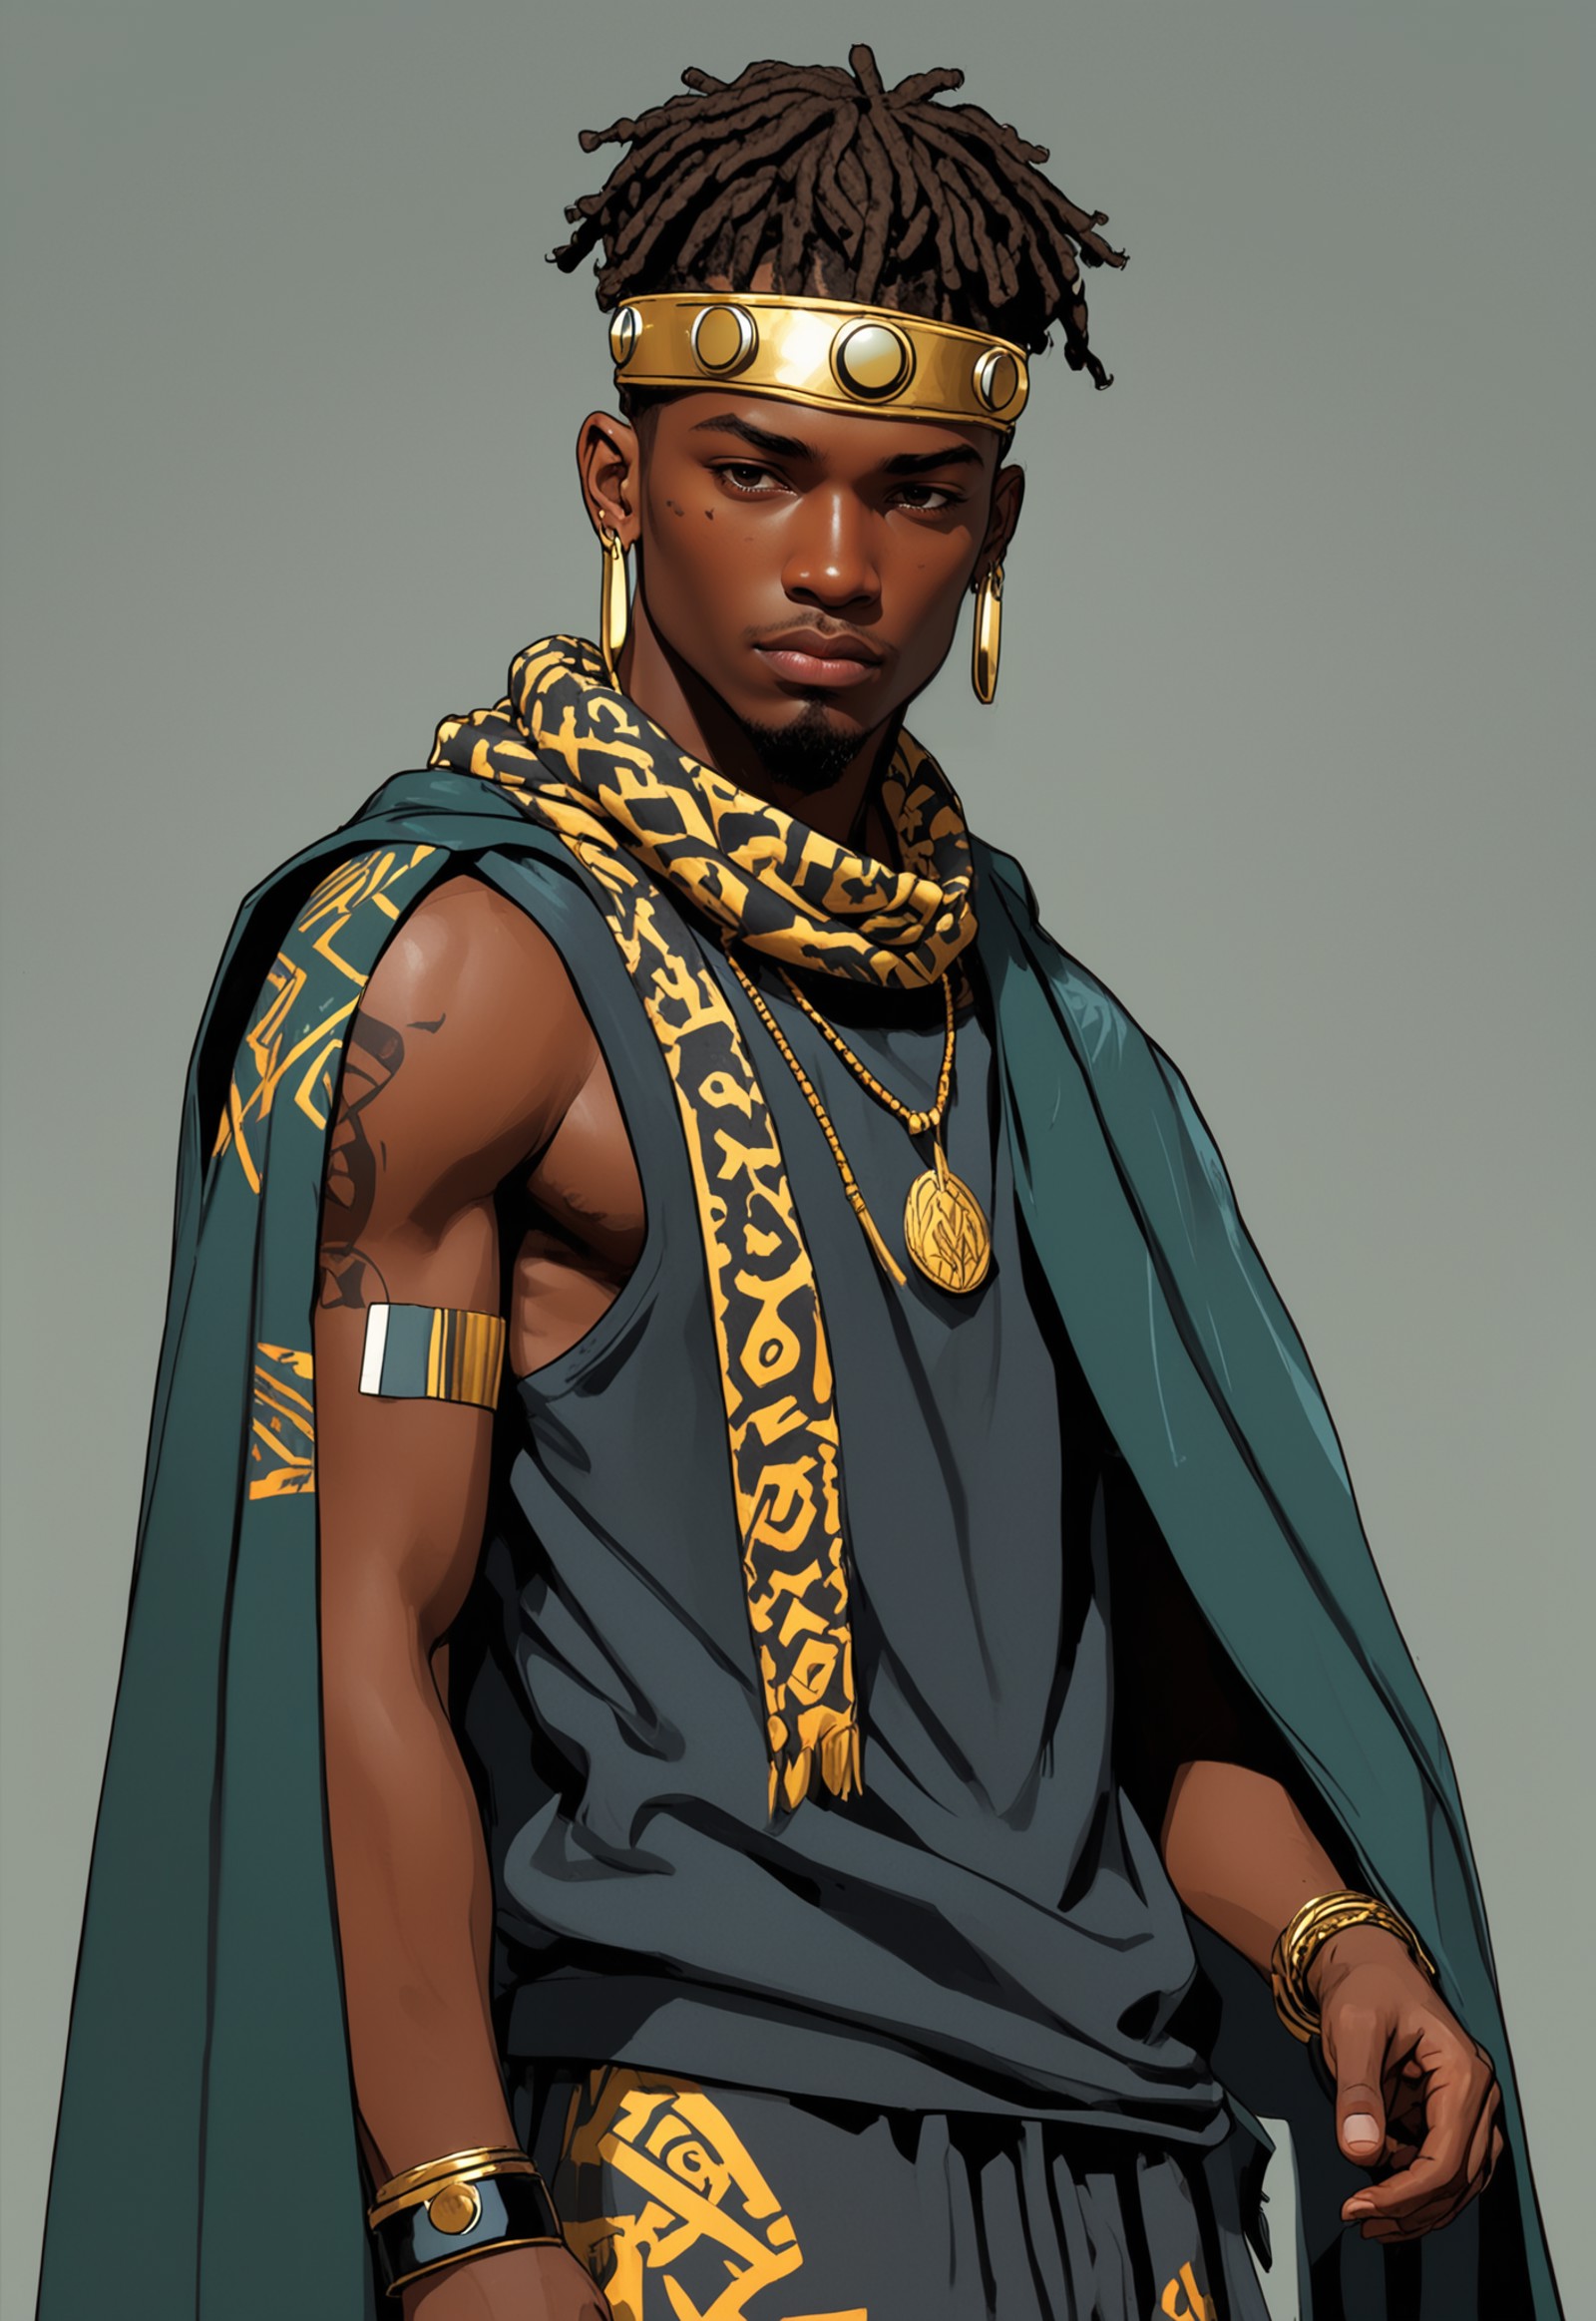 character concept art with dynamic poses for a young African Prince hair of braids, wearing track suit, tribal print cloak...